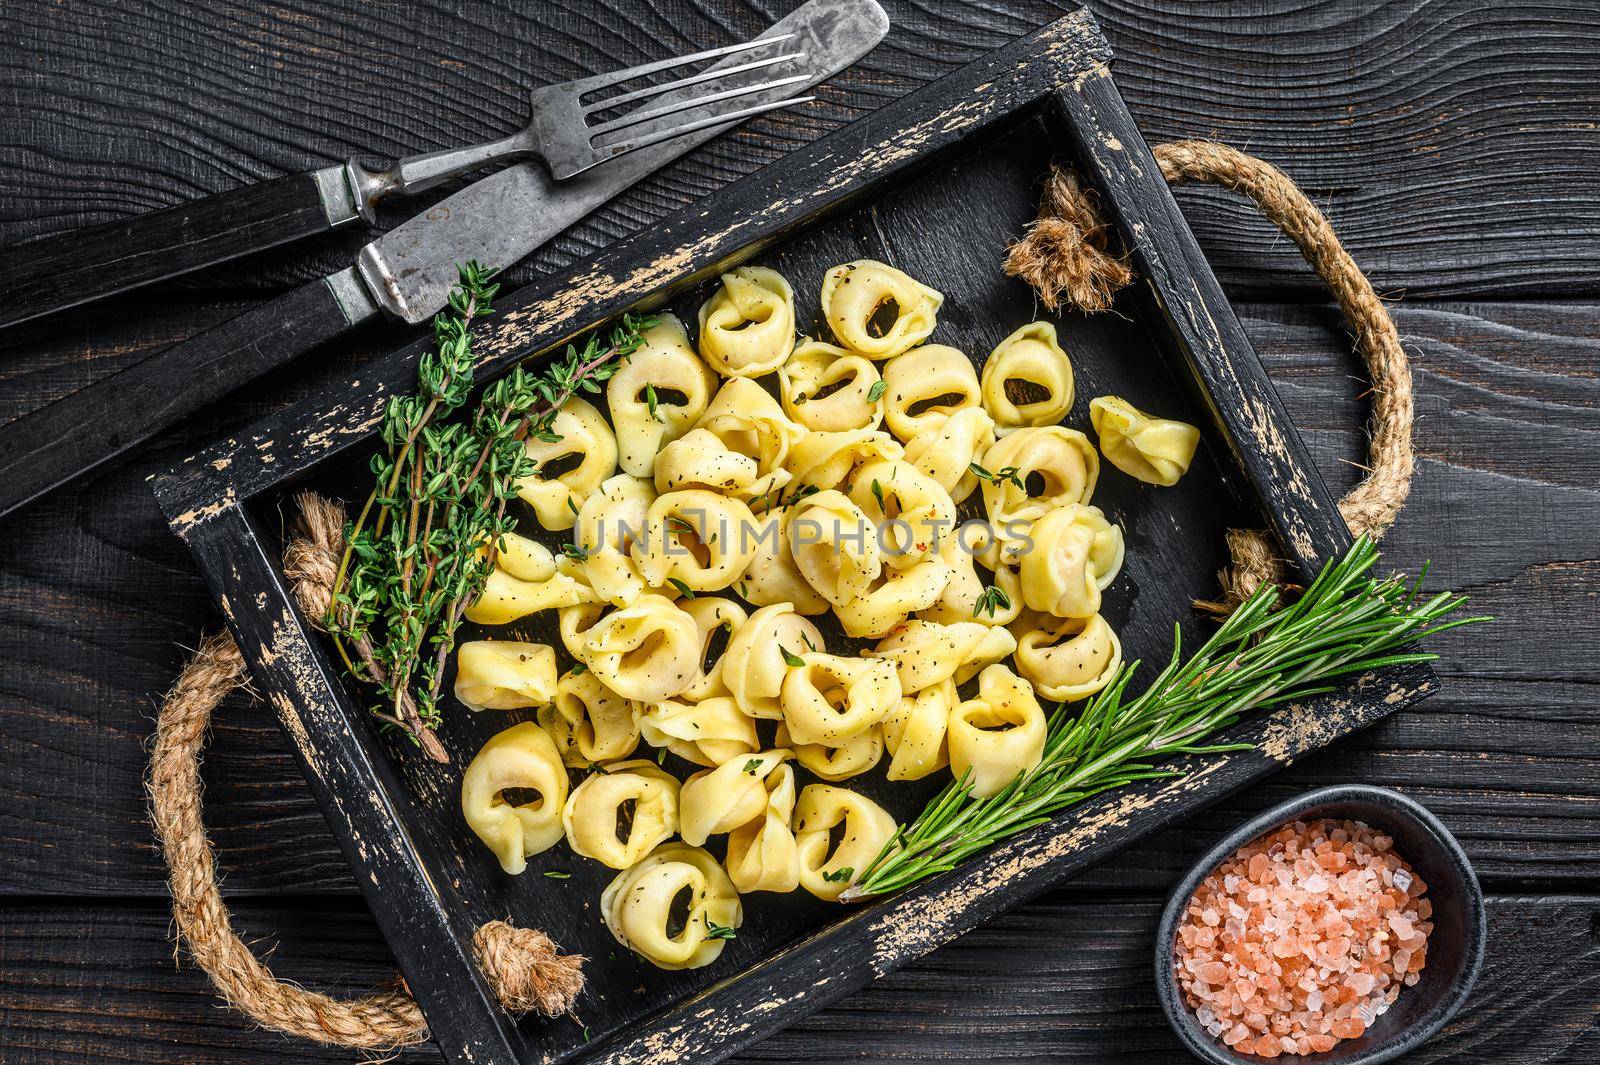 Italian traditional tortellini pasta with spinach in a wooden tray. Black wooden background. Top view.